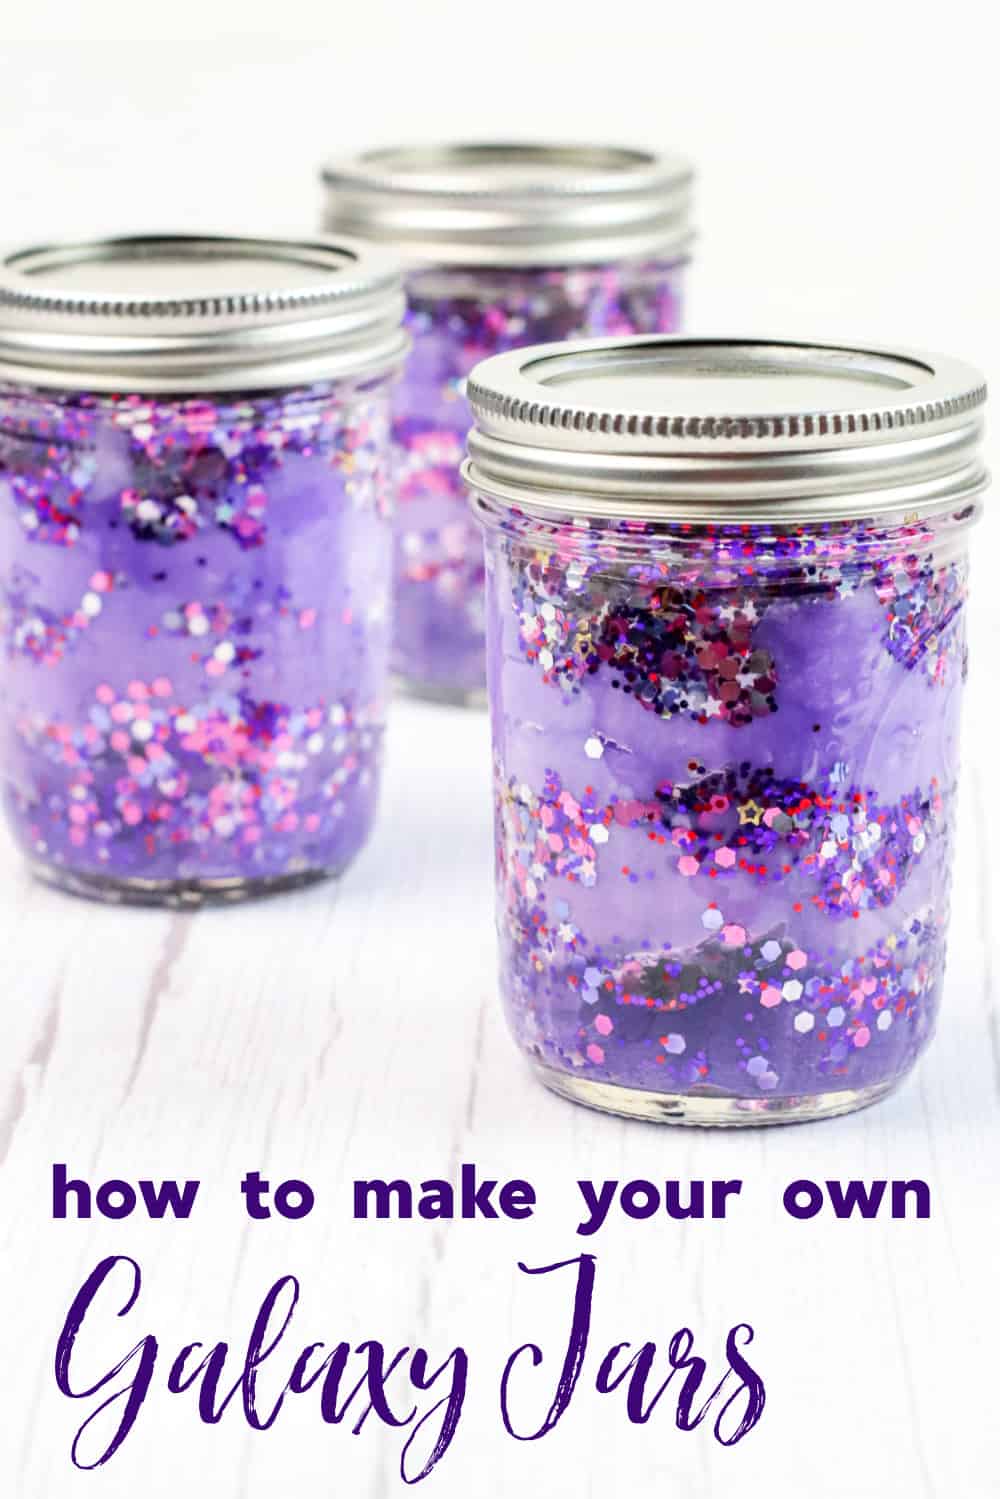 Galaxy in a Jar - Everyone loves a great sensory bottle, right? This gorgeous craft with generous amount of glitter is the perfect calm down jar for kids of all ages! This fun and easy craft is perfect for space fanatics of all ages. With just a few simple supplies, you can create one of your own. via @jugglingactmama